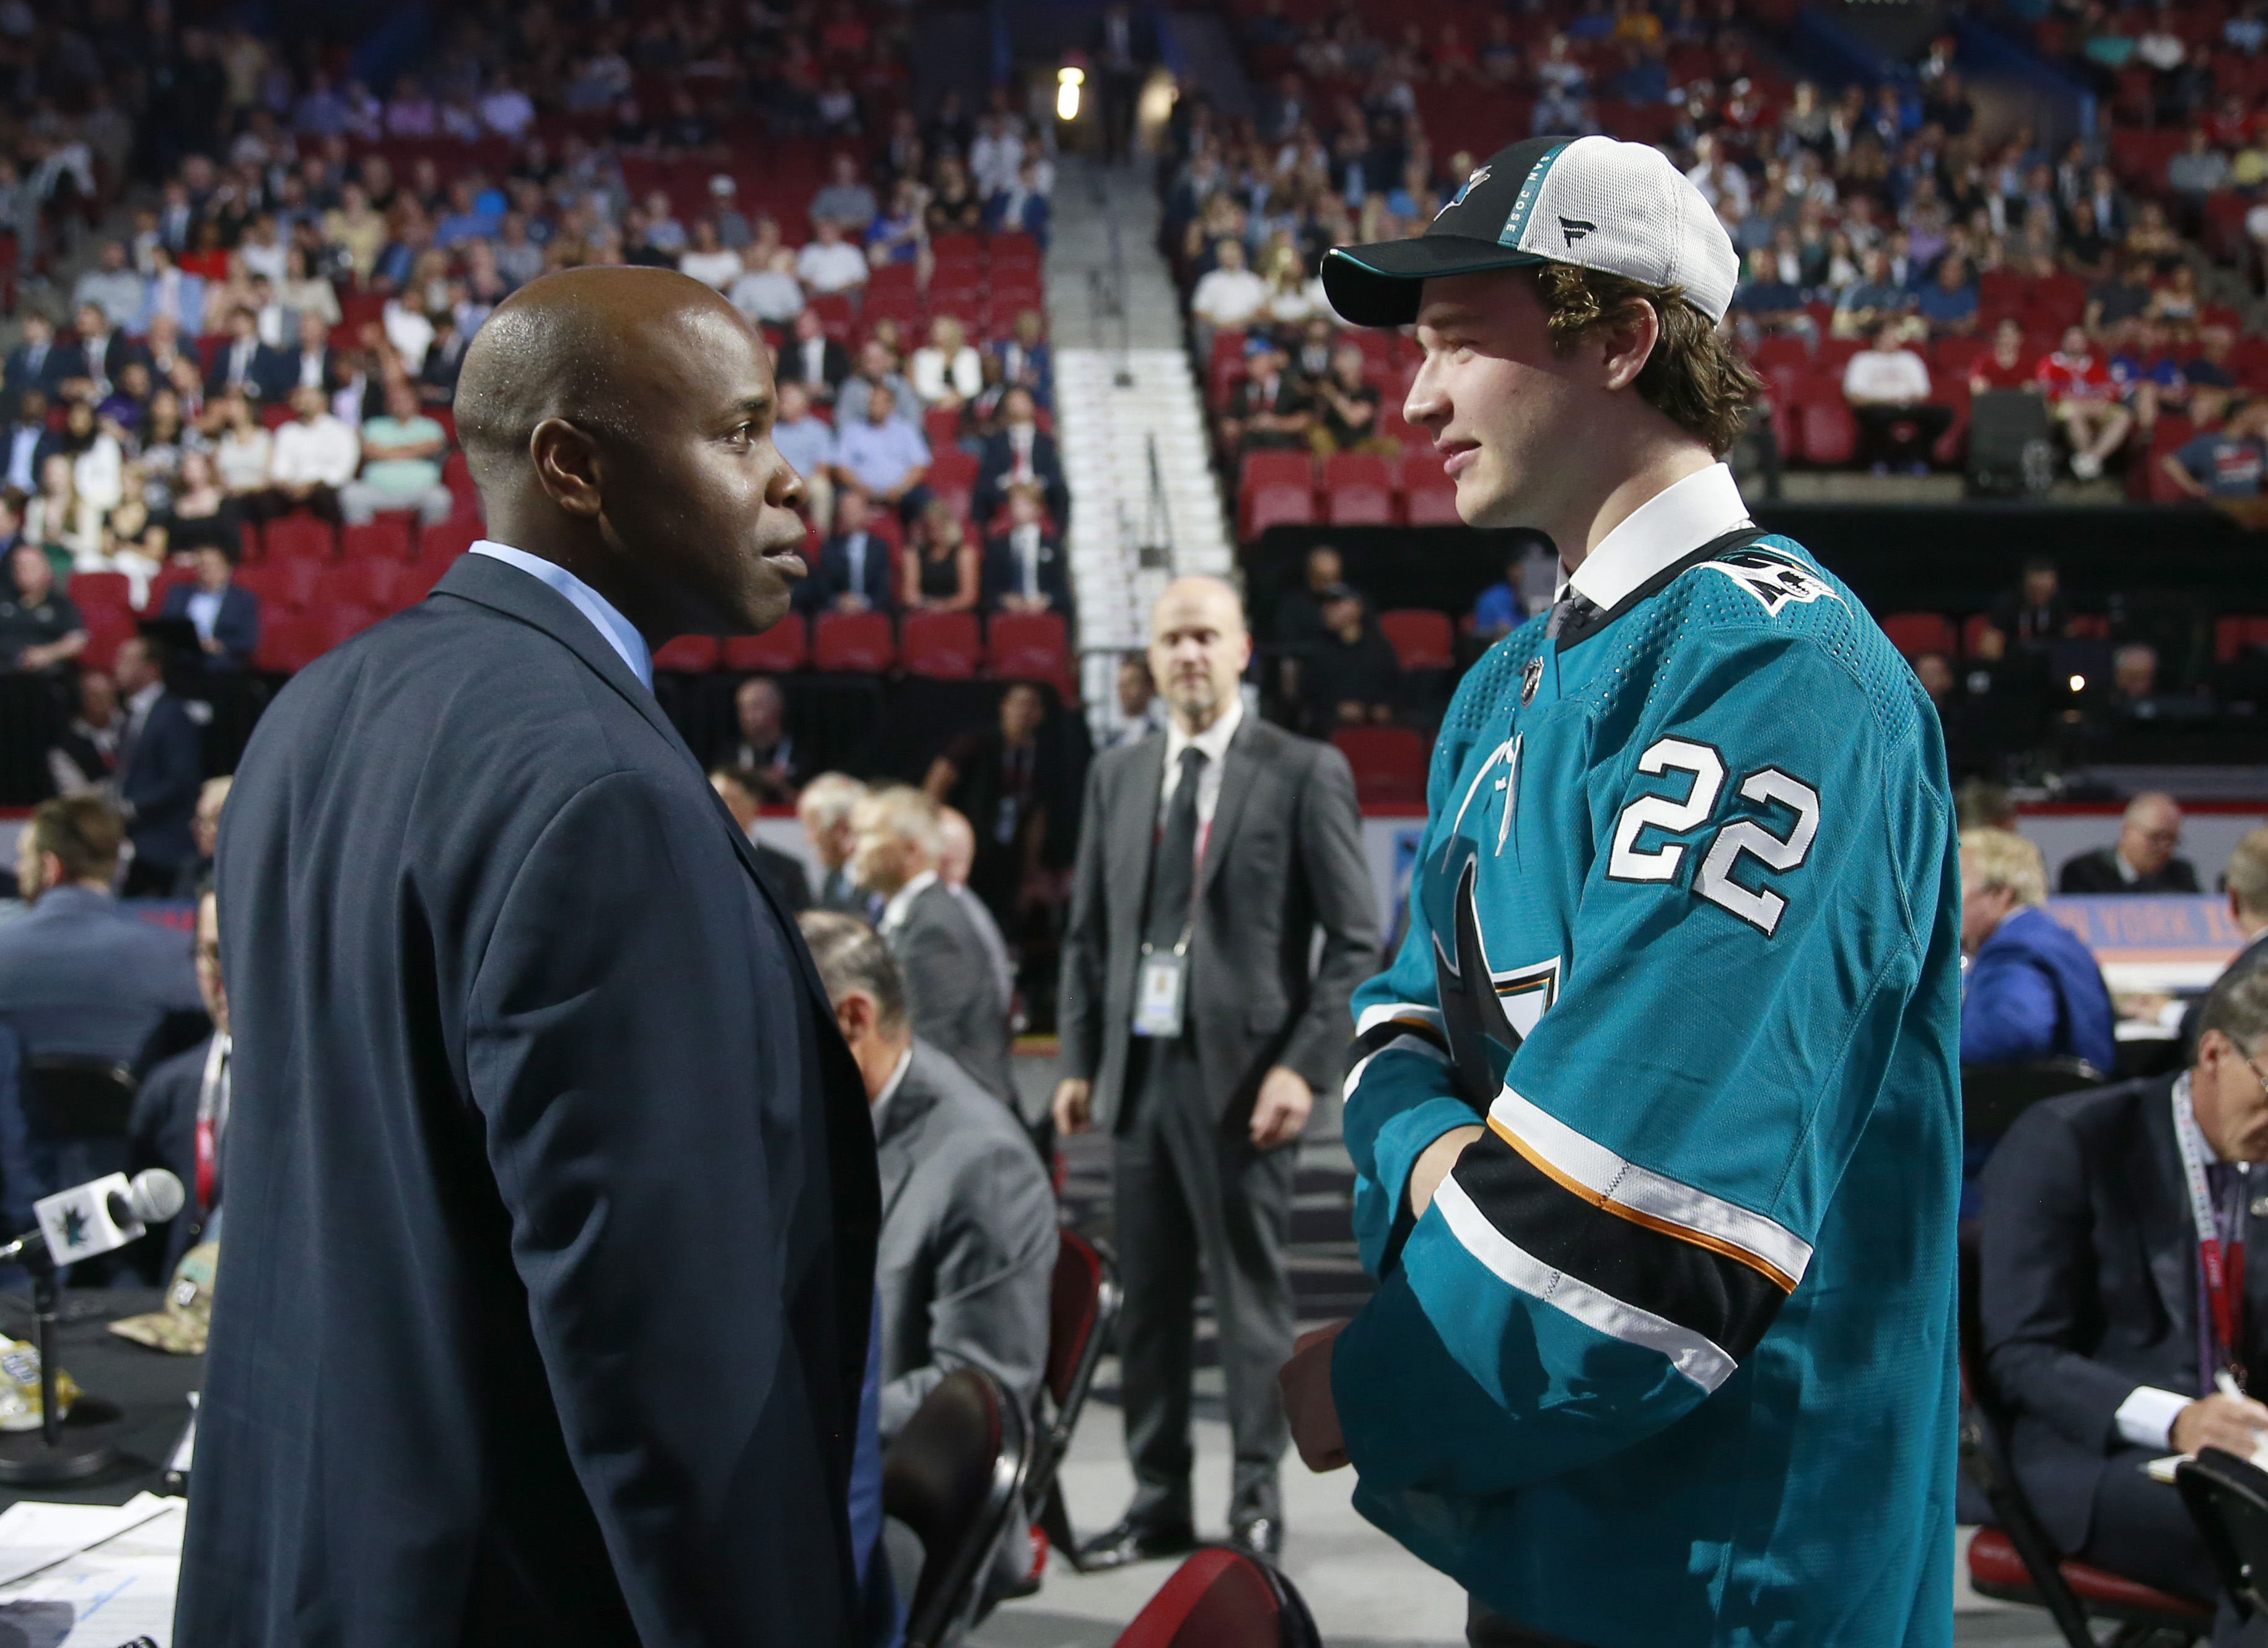 Cameron Lund talks with general manager Mike Grier of the San Jose Sharks (L) after being selected 34th overall by the San Jose Sharks during the 2022 Upper Deck NHL Draft at Bell Centre on July 08, 2022 in Montreal, Quebec.